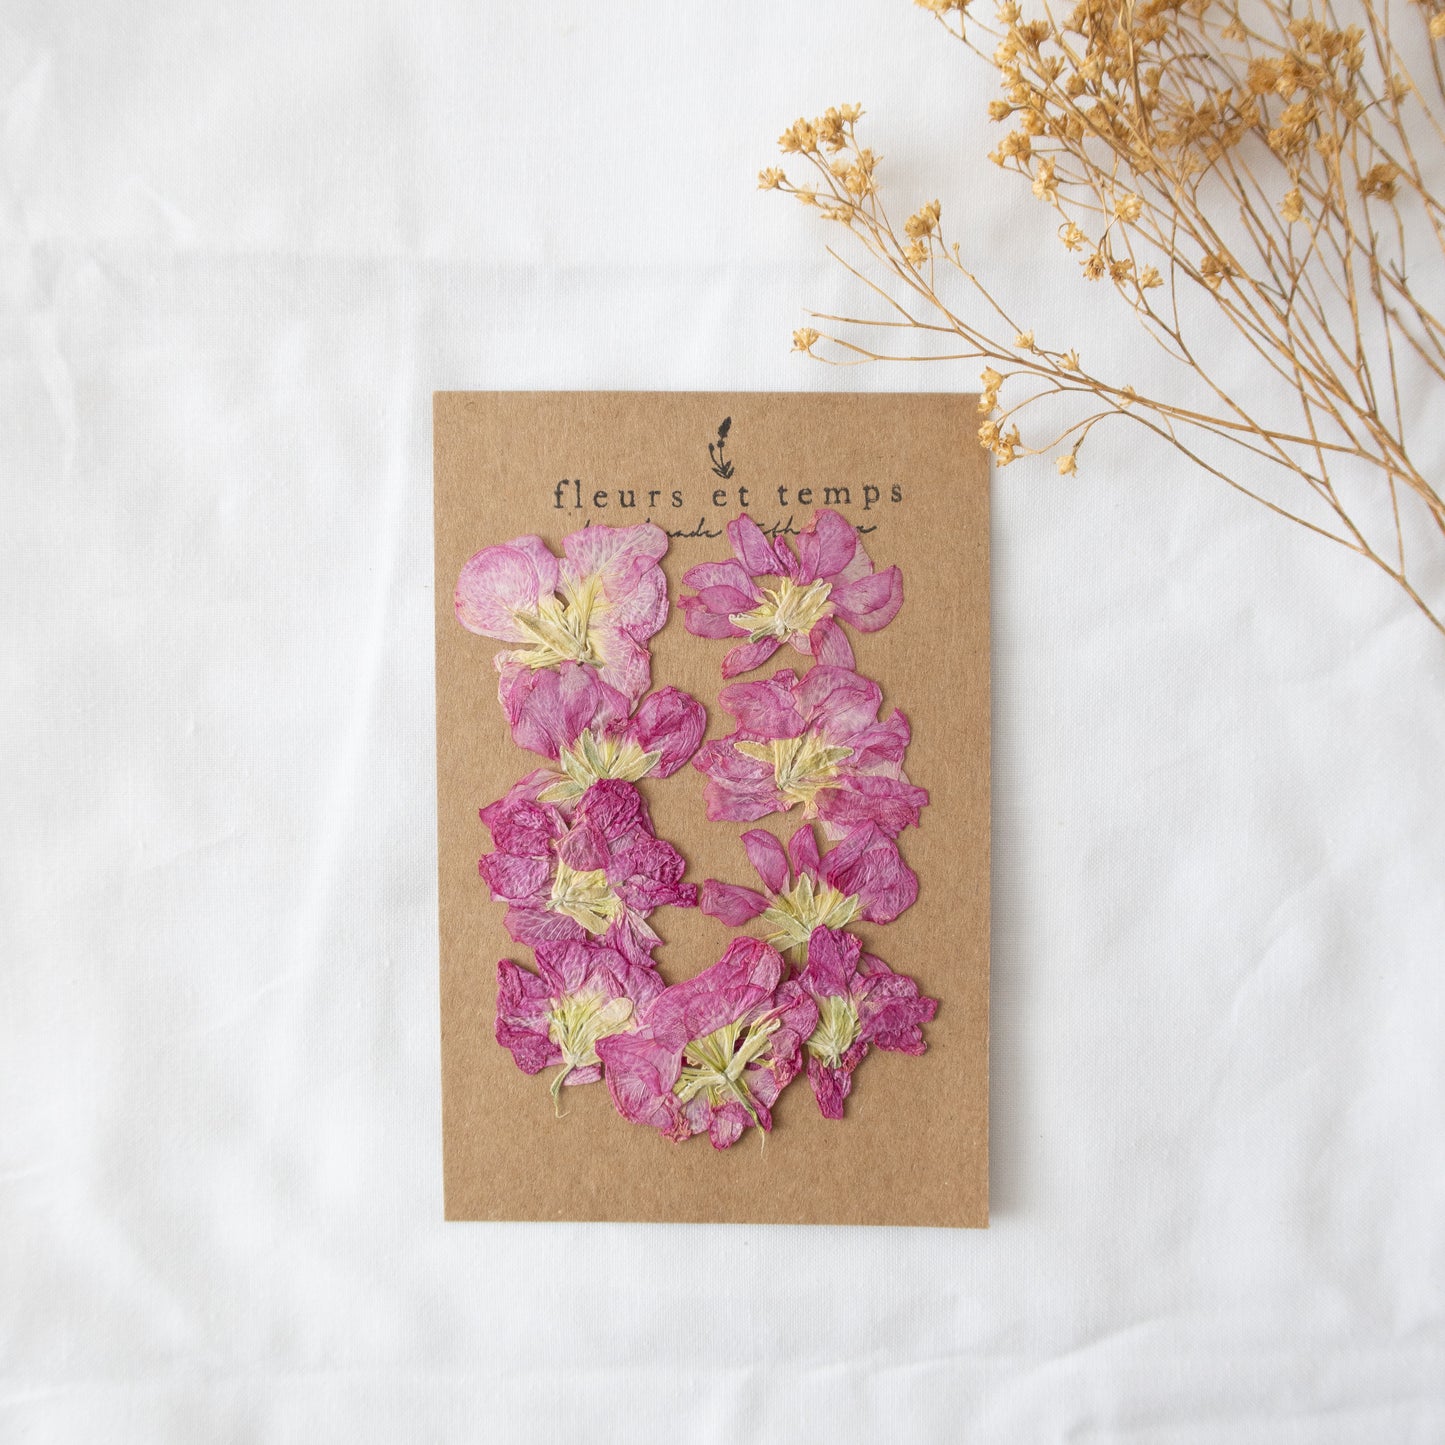 Pressed Pink Stock Flowers